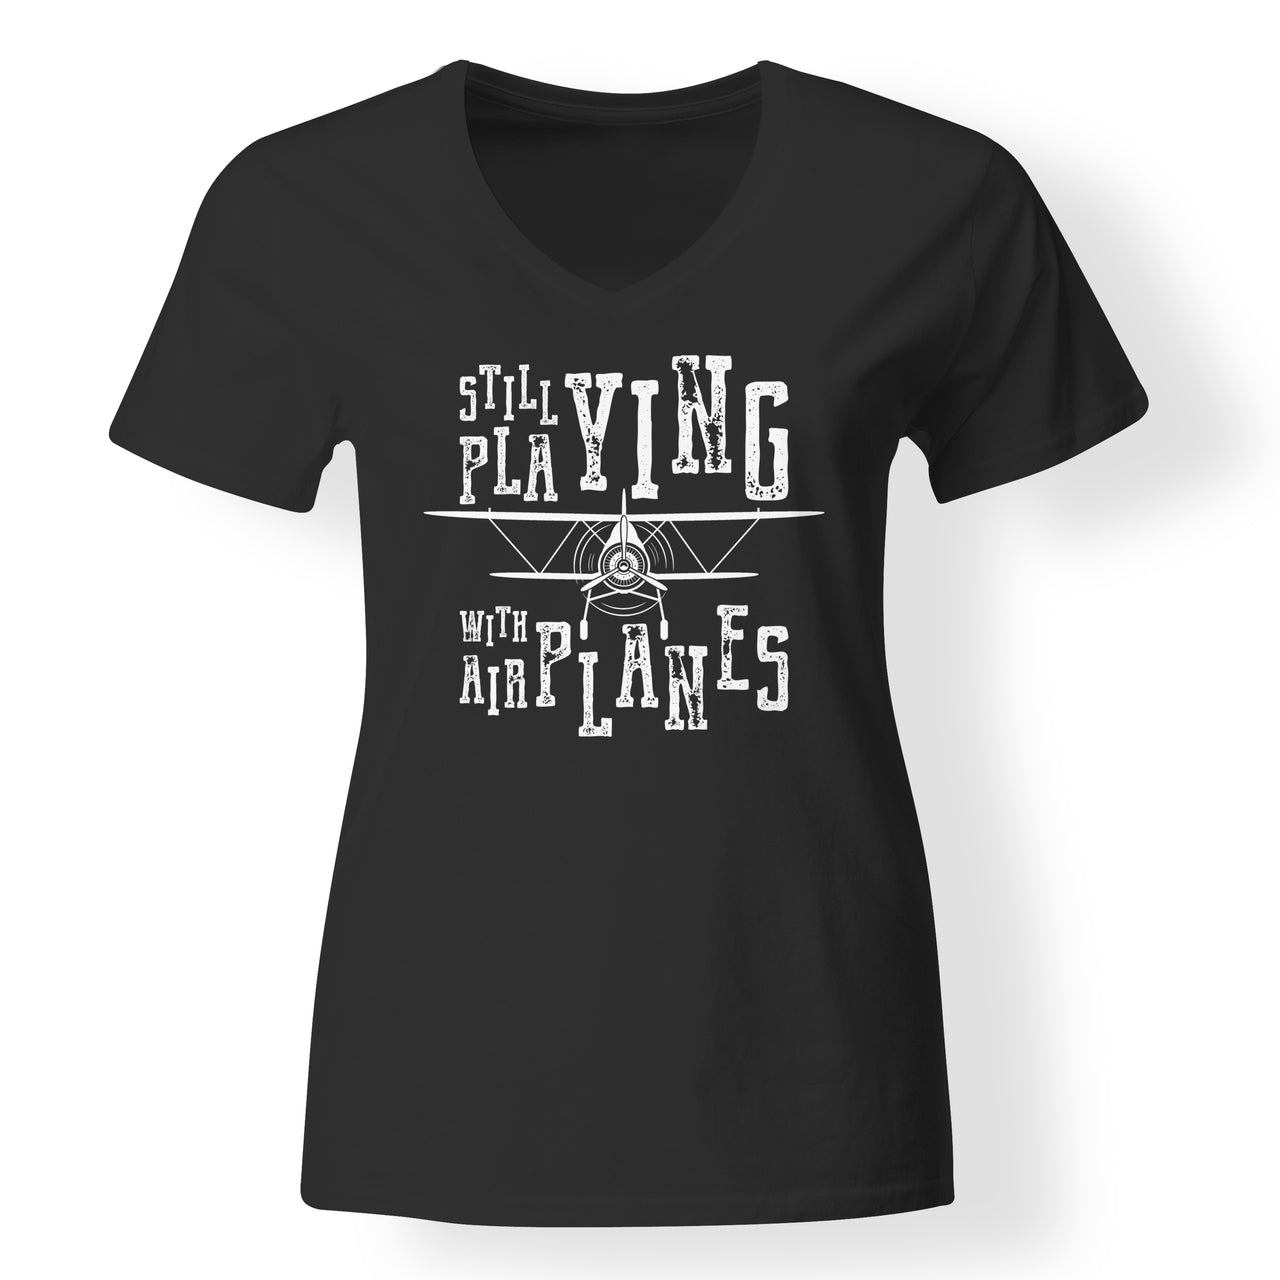 Still Playing With Airplanes Designed V-Neck T-Shirts